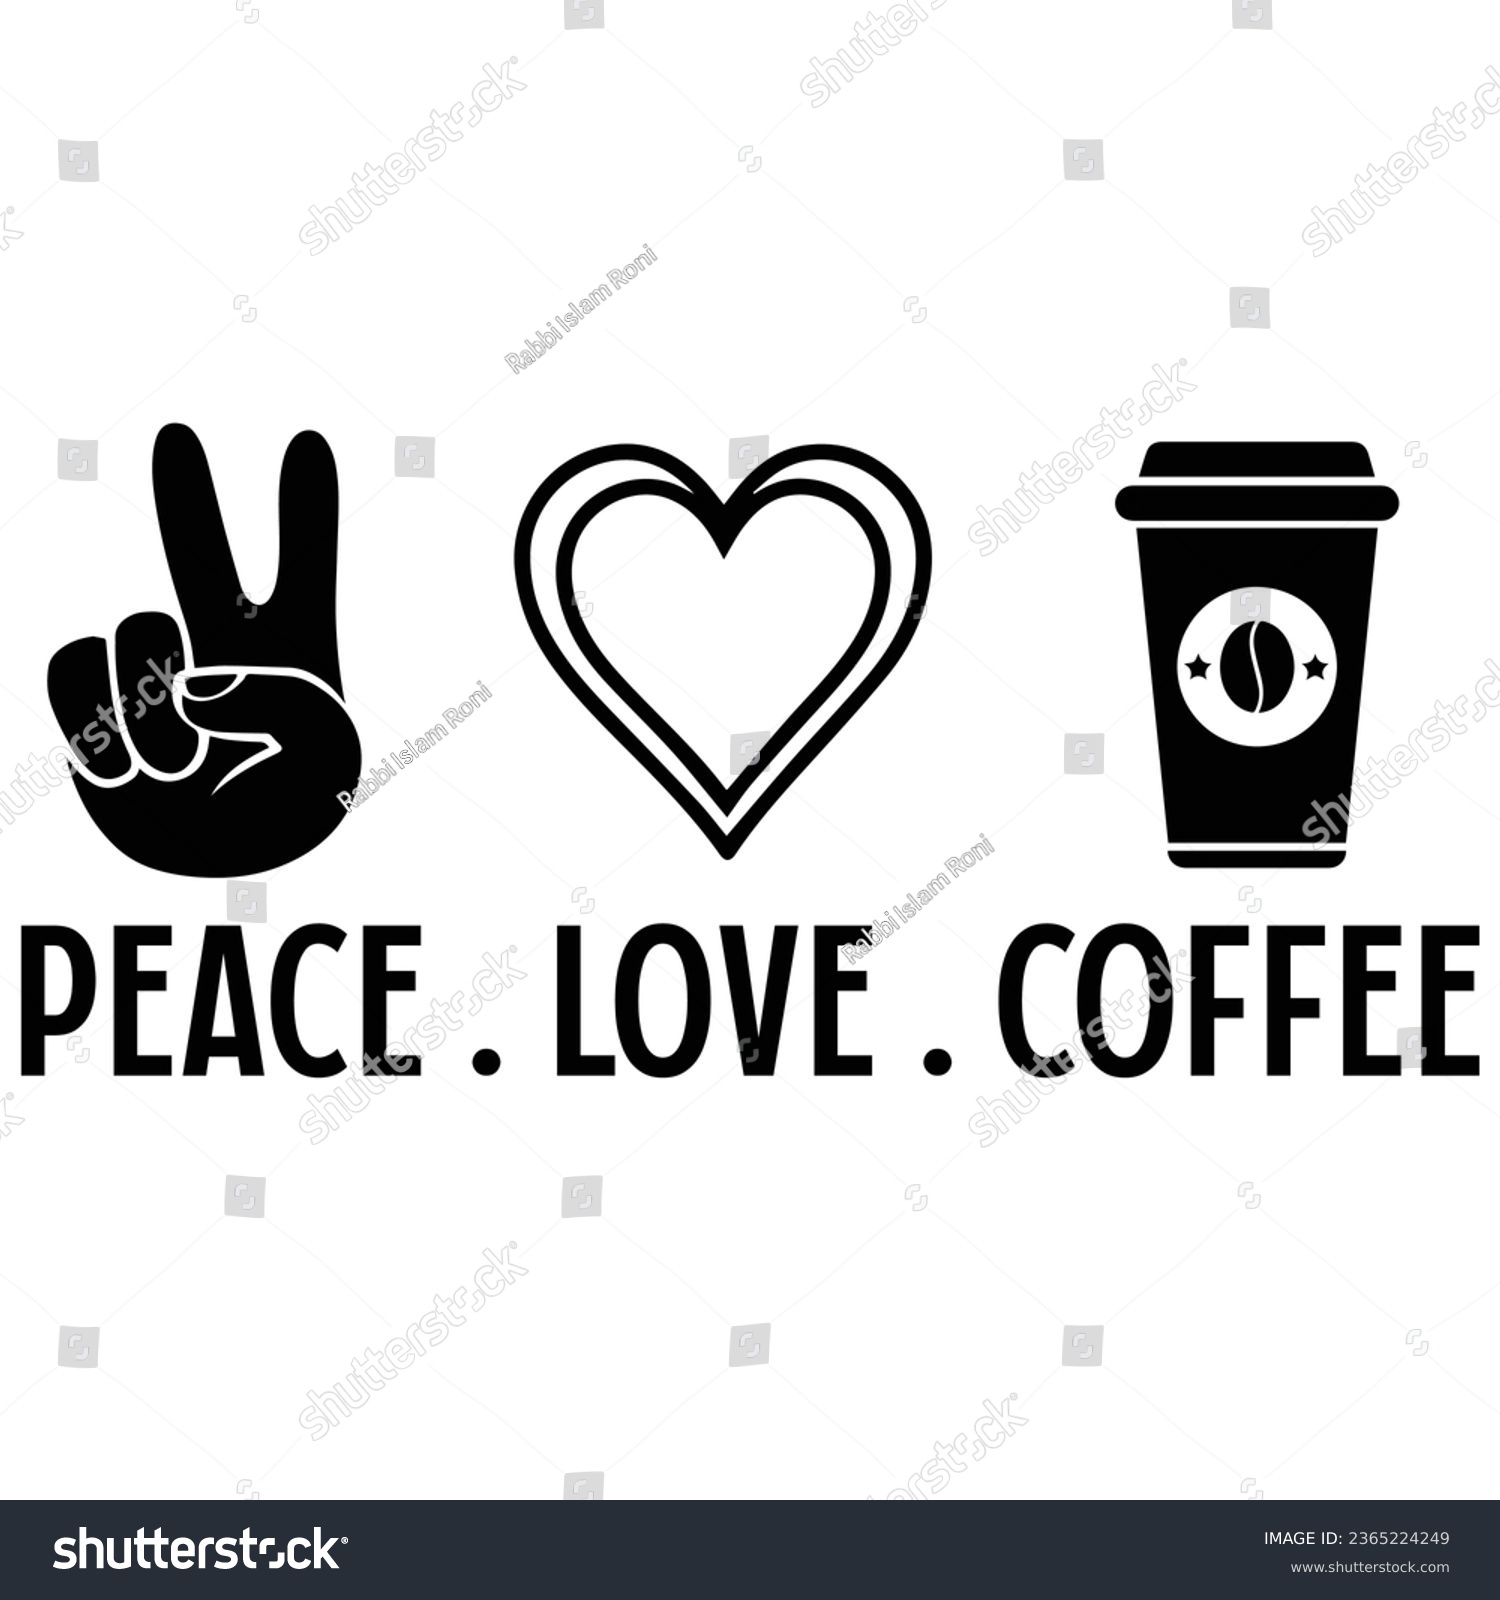 SVG of peace.love.coffee,  Coffee Quotes Design Template svg